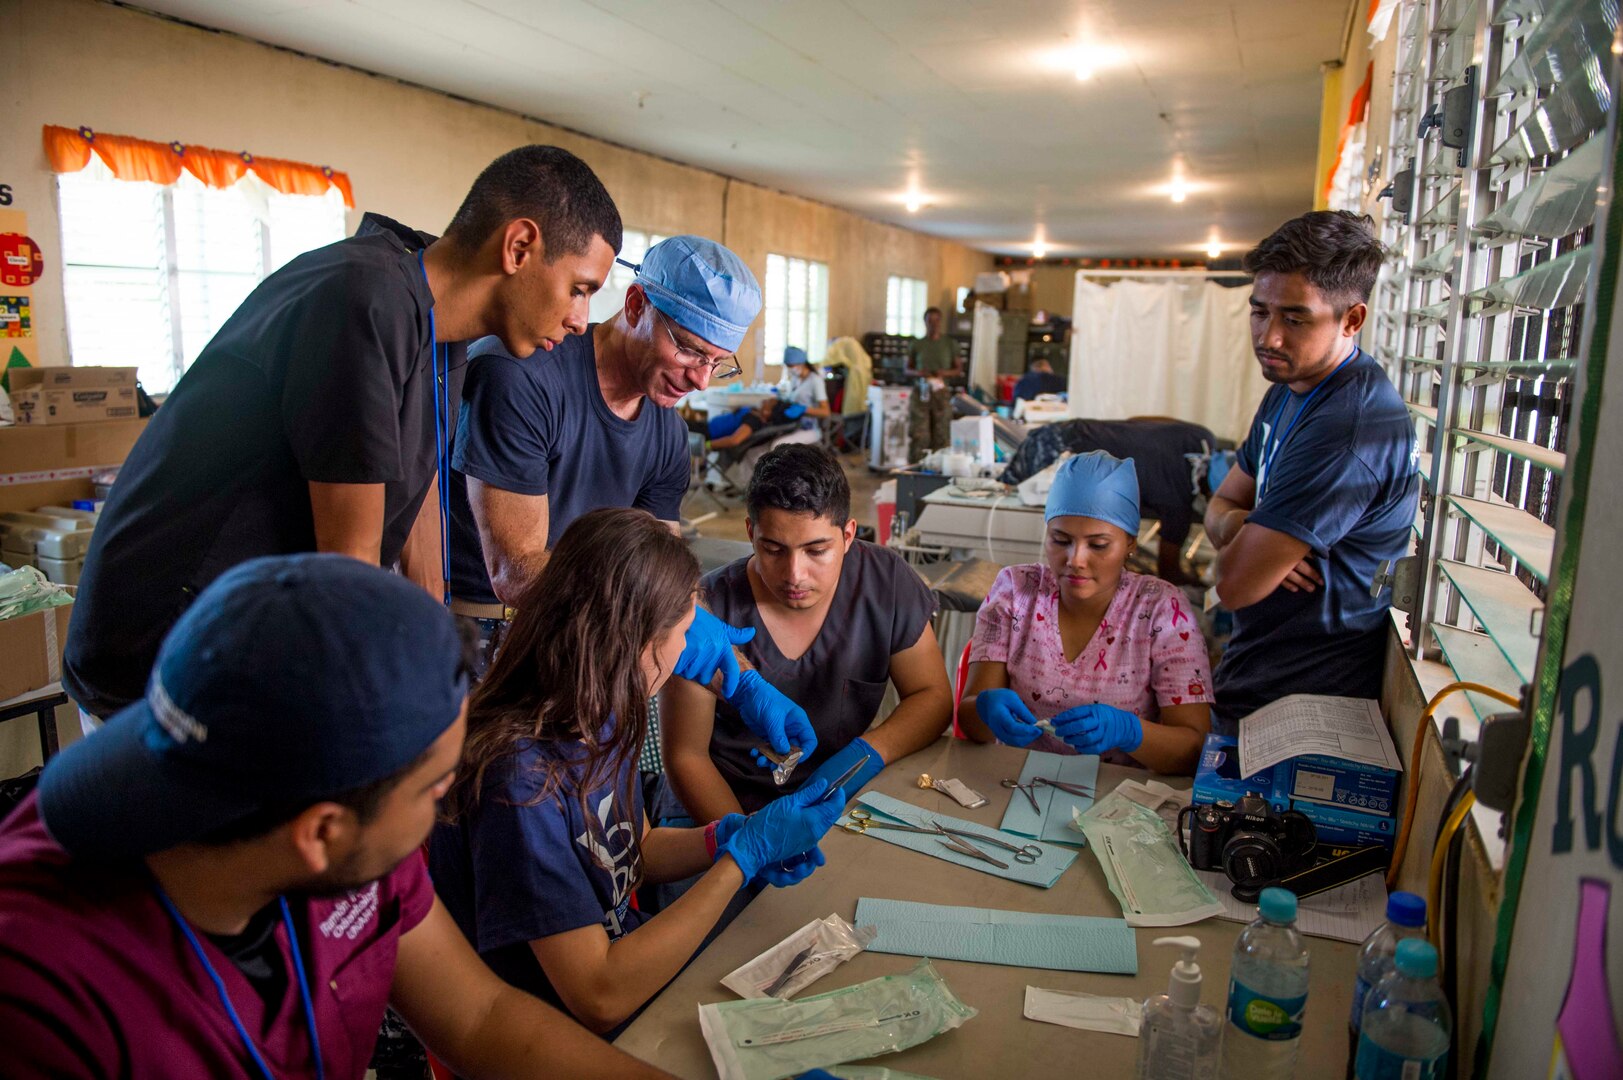 TRUJILLO, Honduras (Feb. 25, 2017) Cmdr. Christopher Crecelius, assigned to Walter Reed National Military Medical Center, Bethesda, Md., conducts a dental procedure training session for Honduran residents during Continuing Promise 2017 (CP-17) in Trujillo, Honduras. CP-17 is a U.S. Southern Command-sponsored and U.S. Naval Forces Southern Command/U.S. 4th Fleet-conducted deployment to conduct civil-military operations including humanitarian assistance, training engagements, and medical, dental, and veterinary support to Central and South America. (U.S. Navy photo by Mass Communication Specialist 2nd Class Shamira Purifoy/Released)
